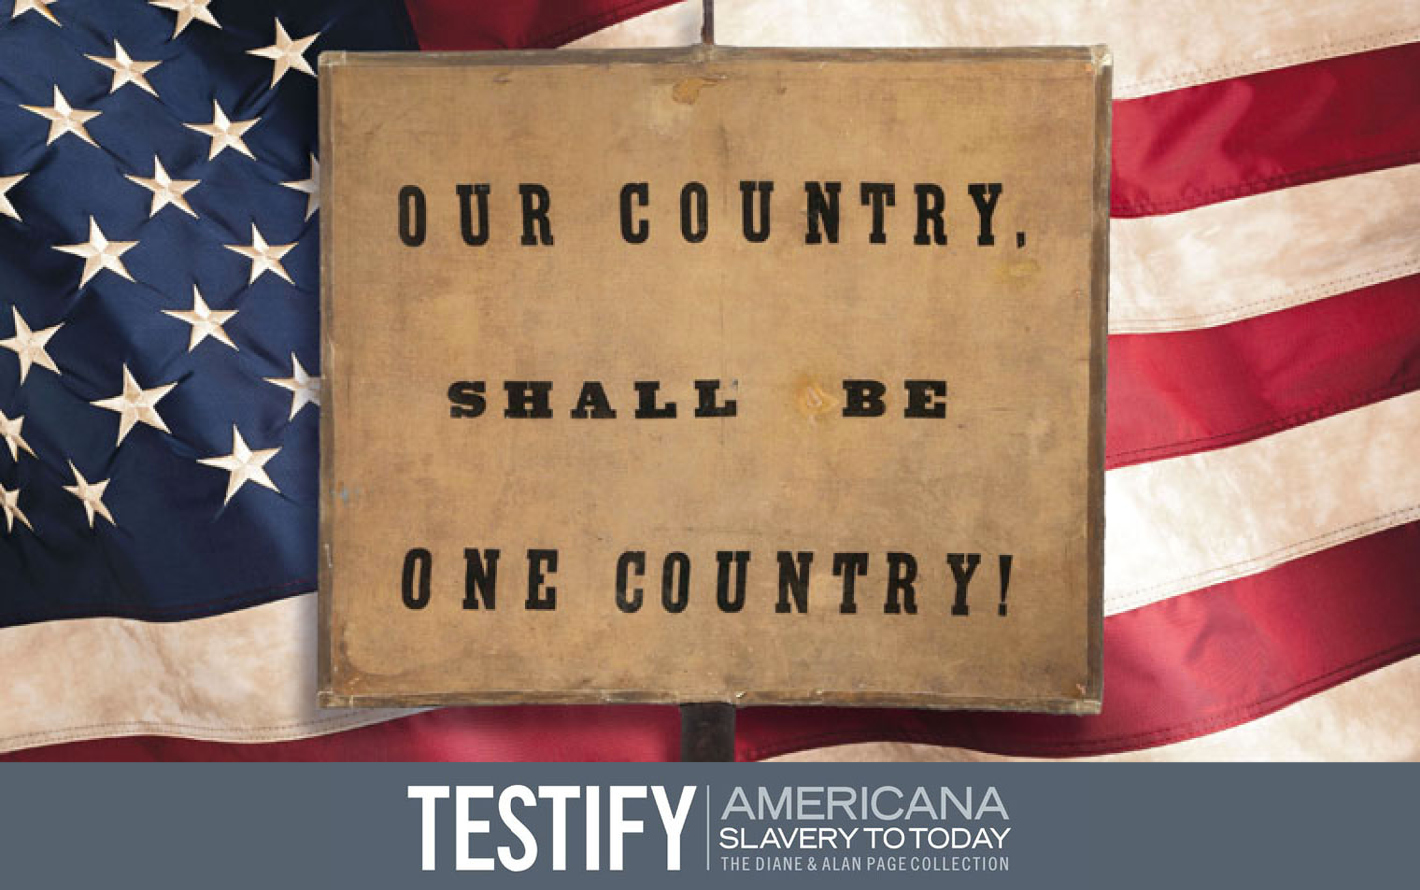 TESTIFY Exhibit Returns to Hennepin County Library